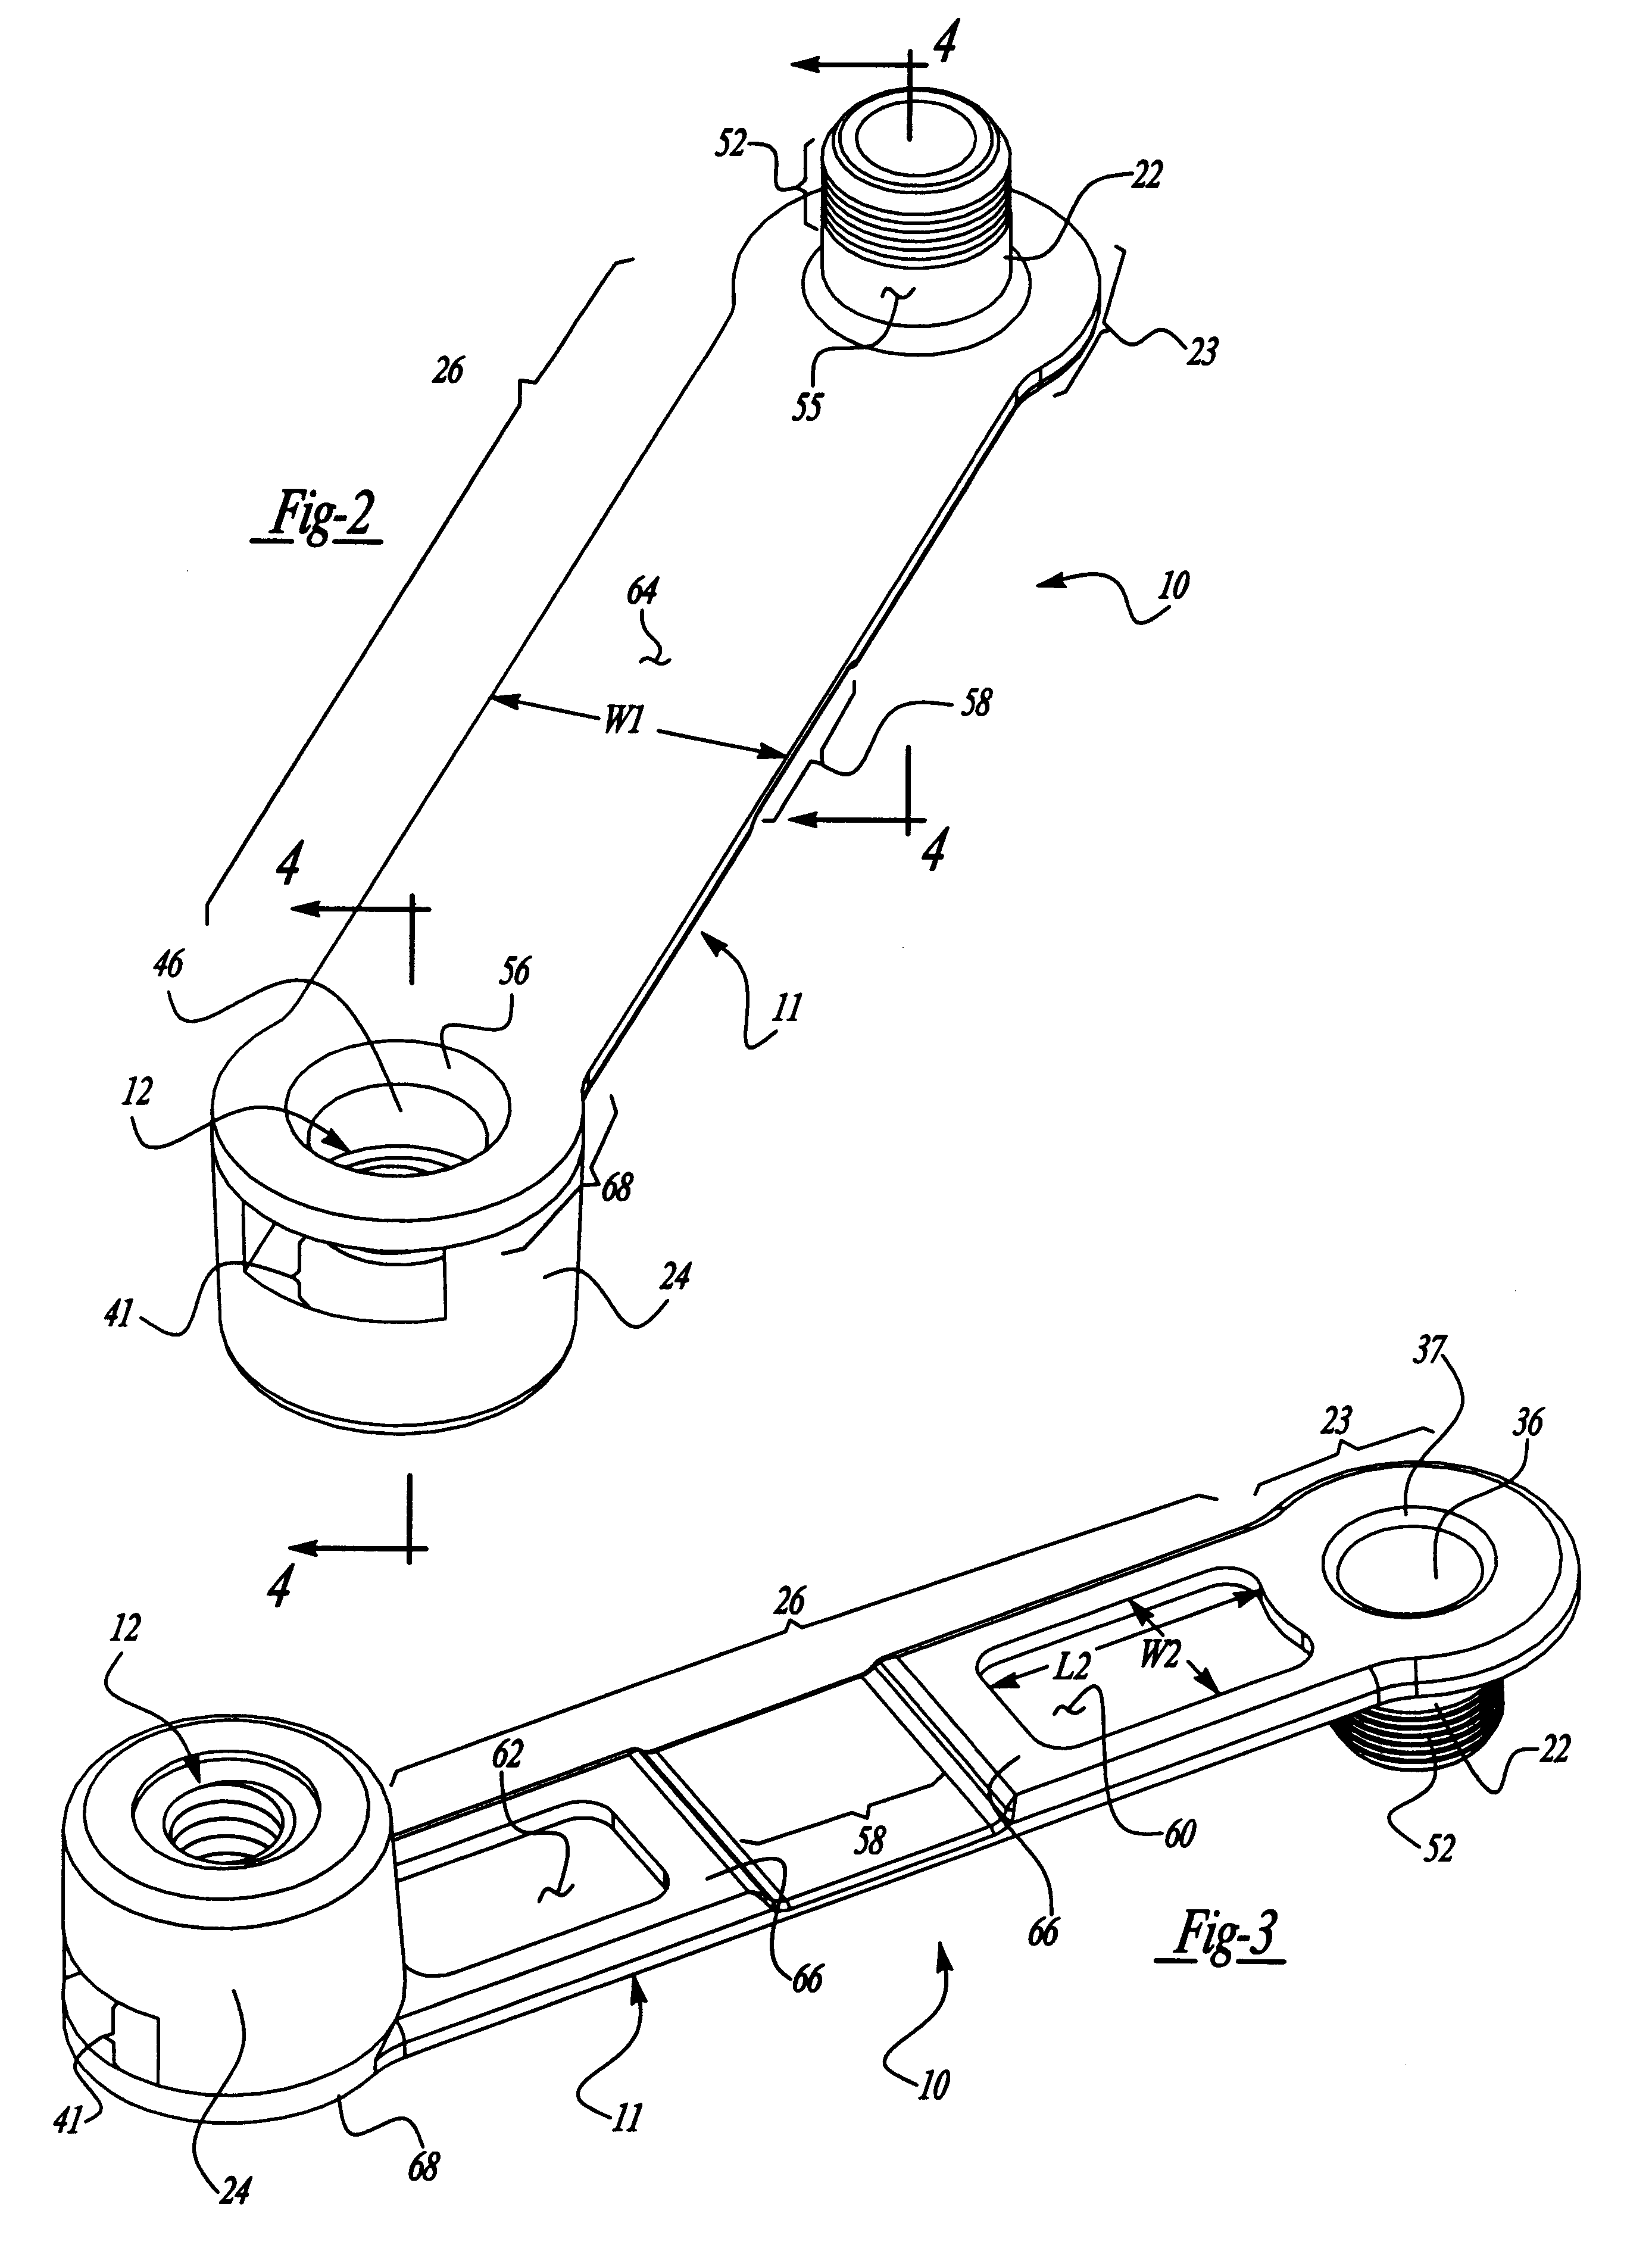 Clip type fastener assembly